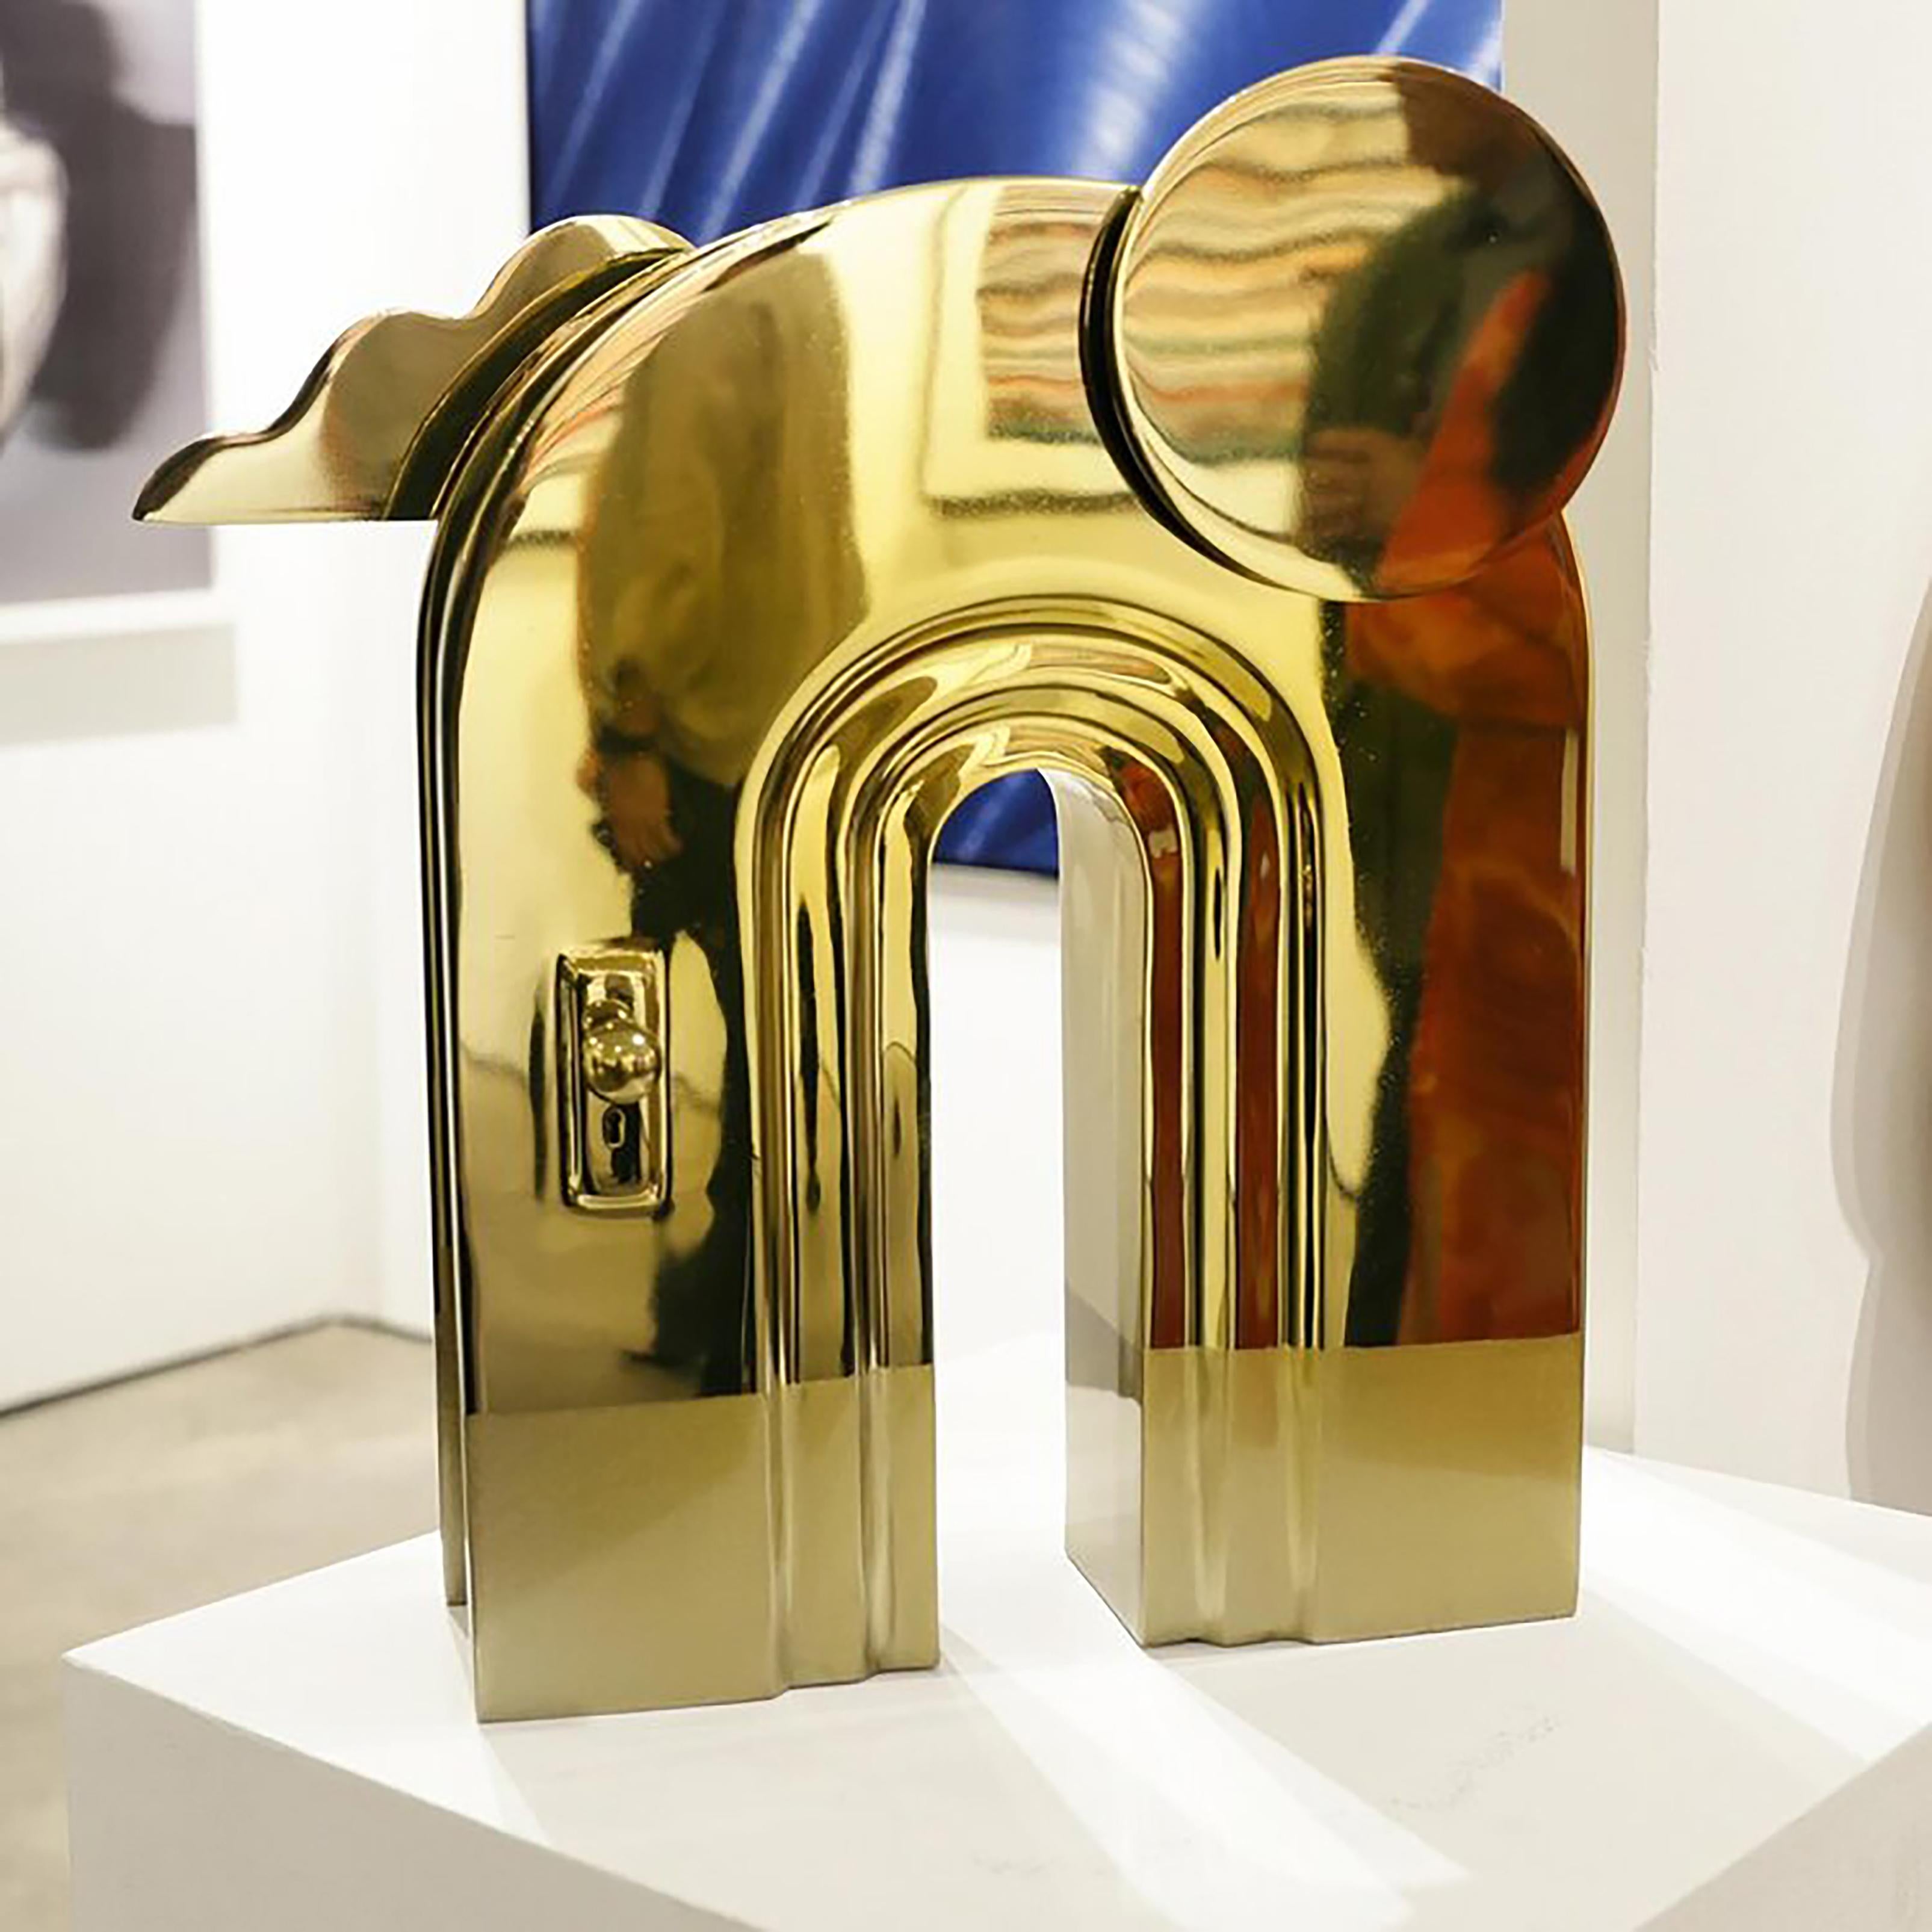 Mary Lai Abstract Sculpture - "Dream Portal(ble) Golden" stainless steel and gold plating sculpture